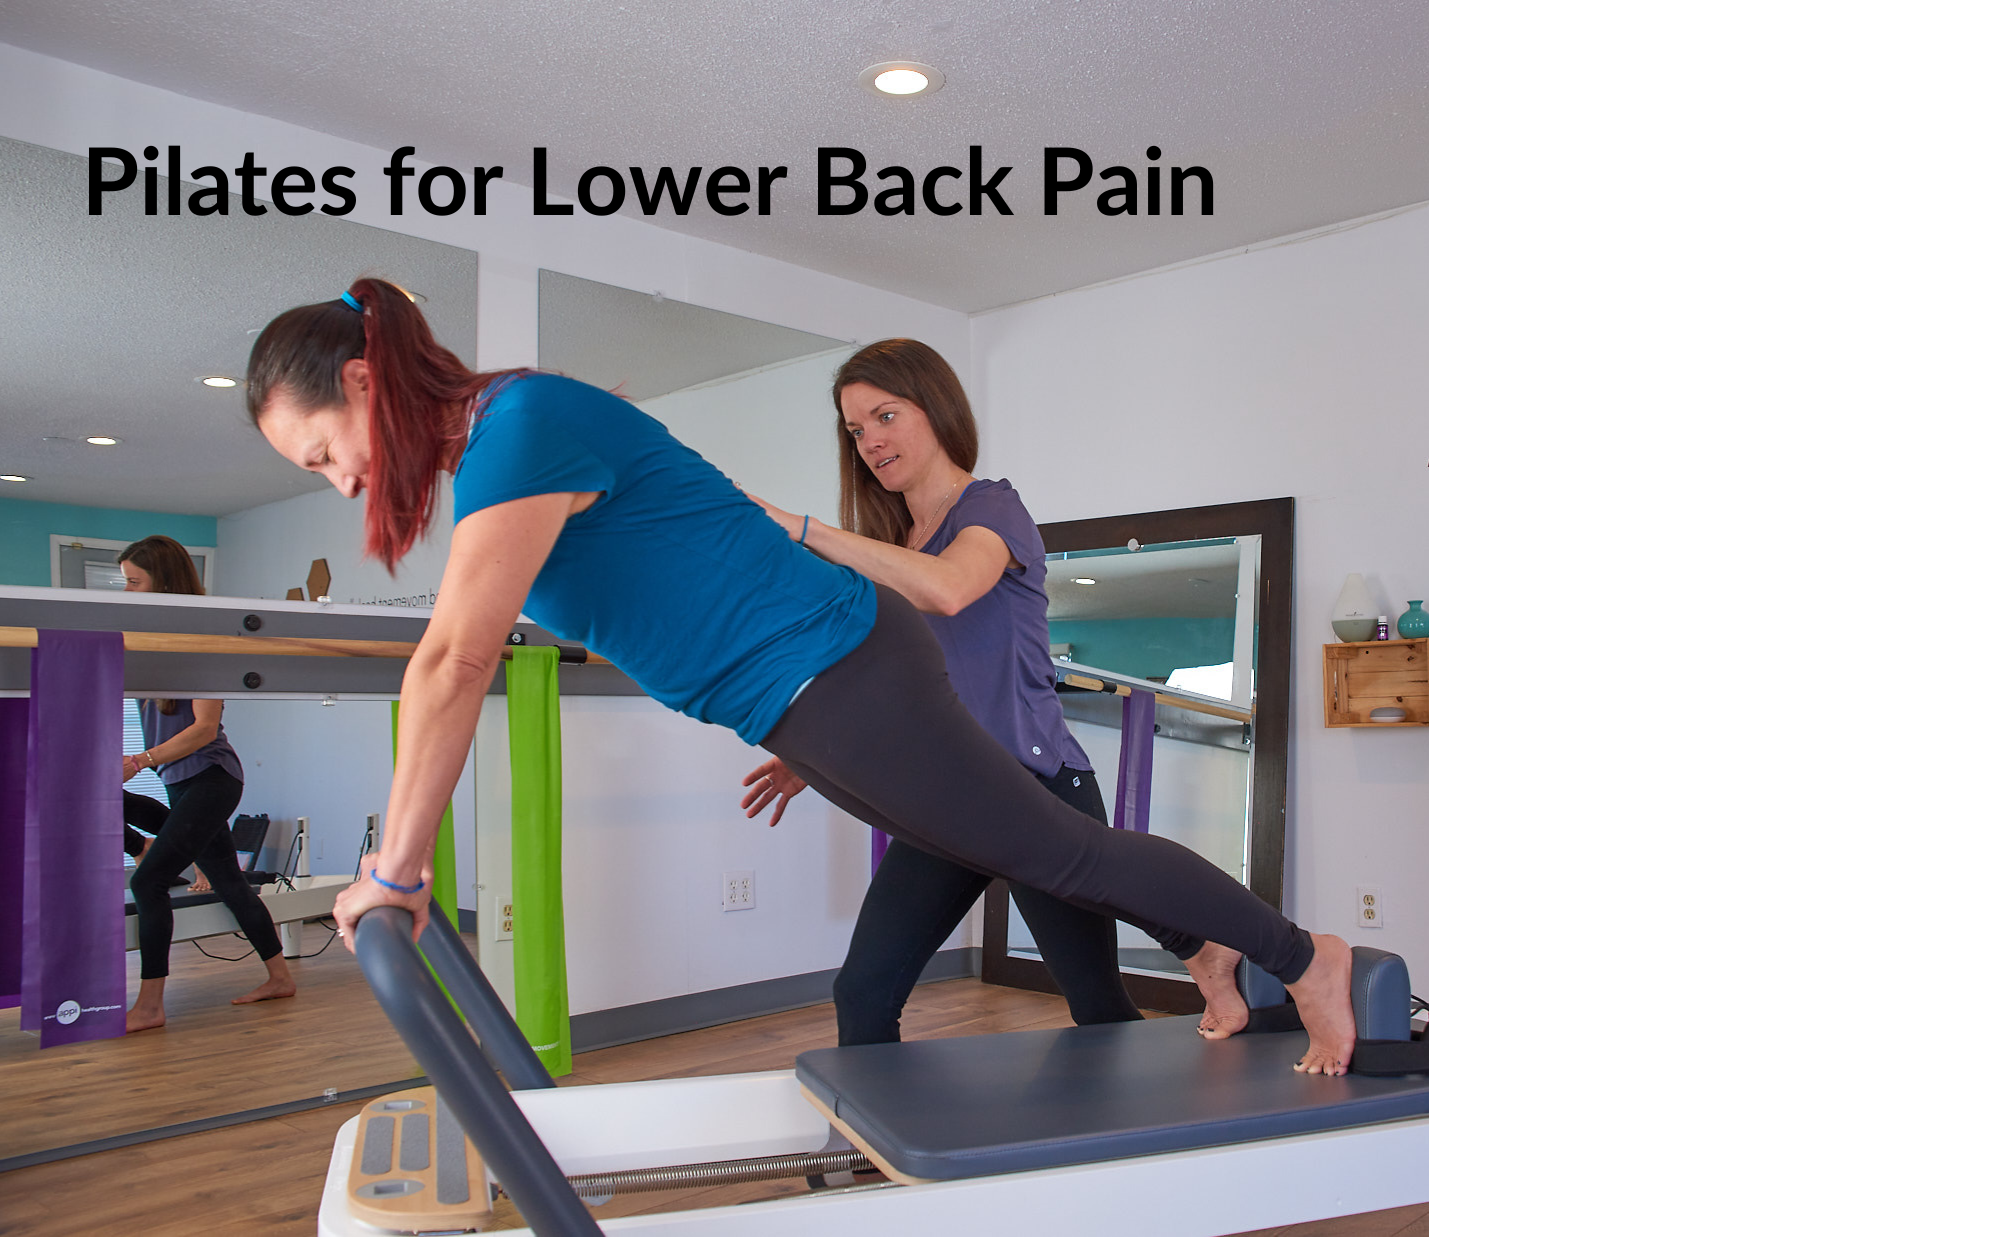 A Pilates instructor showing a client how to exercise for lower back pain.